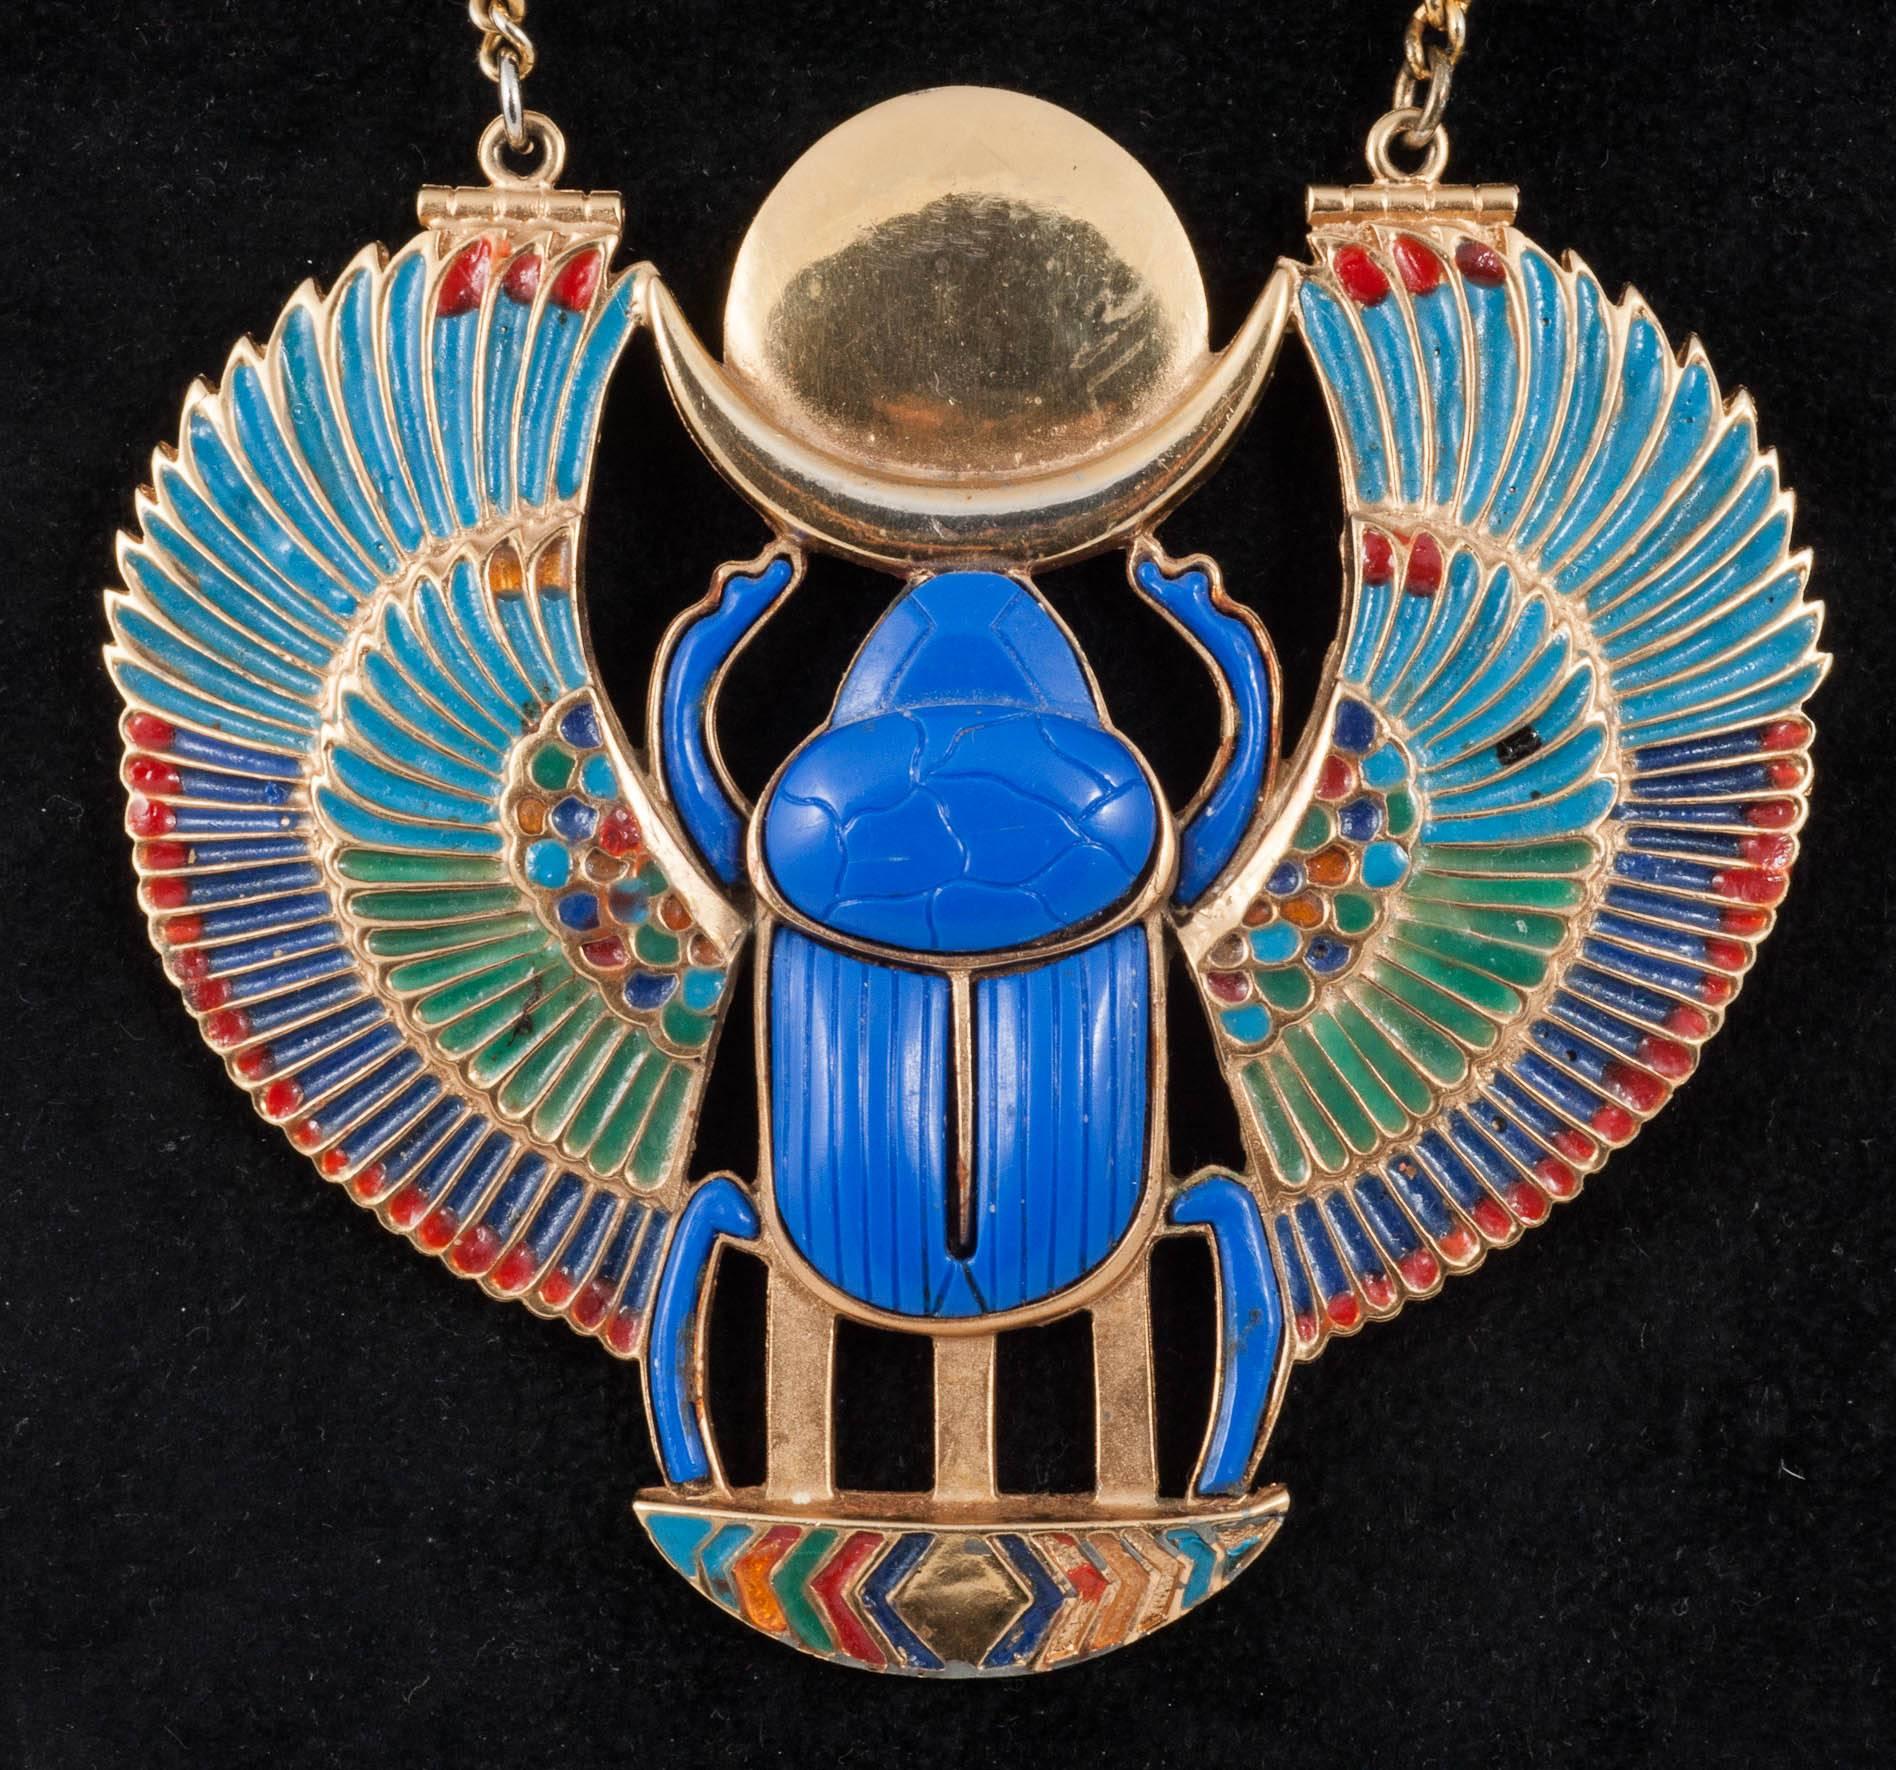 This incredible pendant was made to celebrate the famous British Museum Tutankhamen exhibition in 1972. Thomas Fattorini of Birmingham was a medal and insignia maker who mainly made regimental regalia, hence the lovely quality of this striking